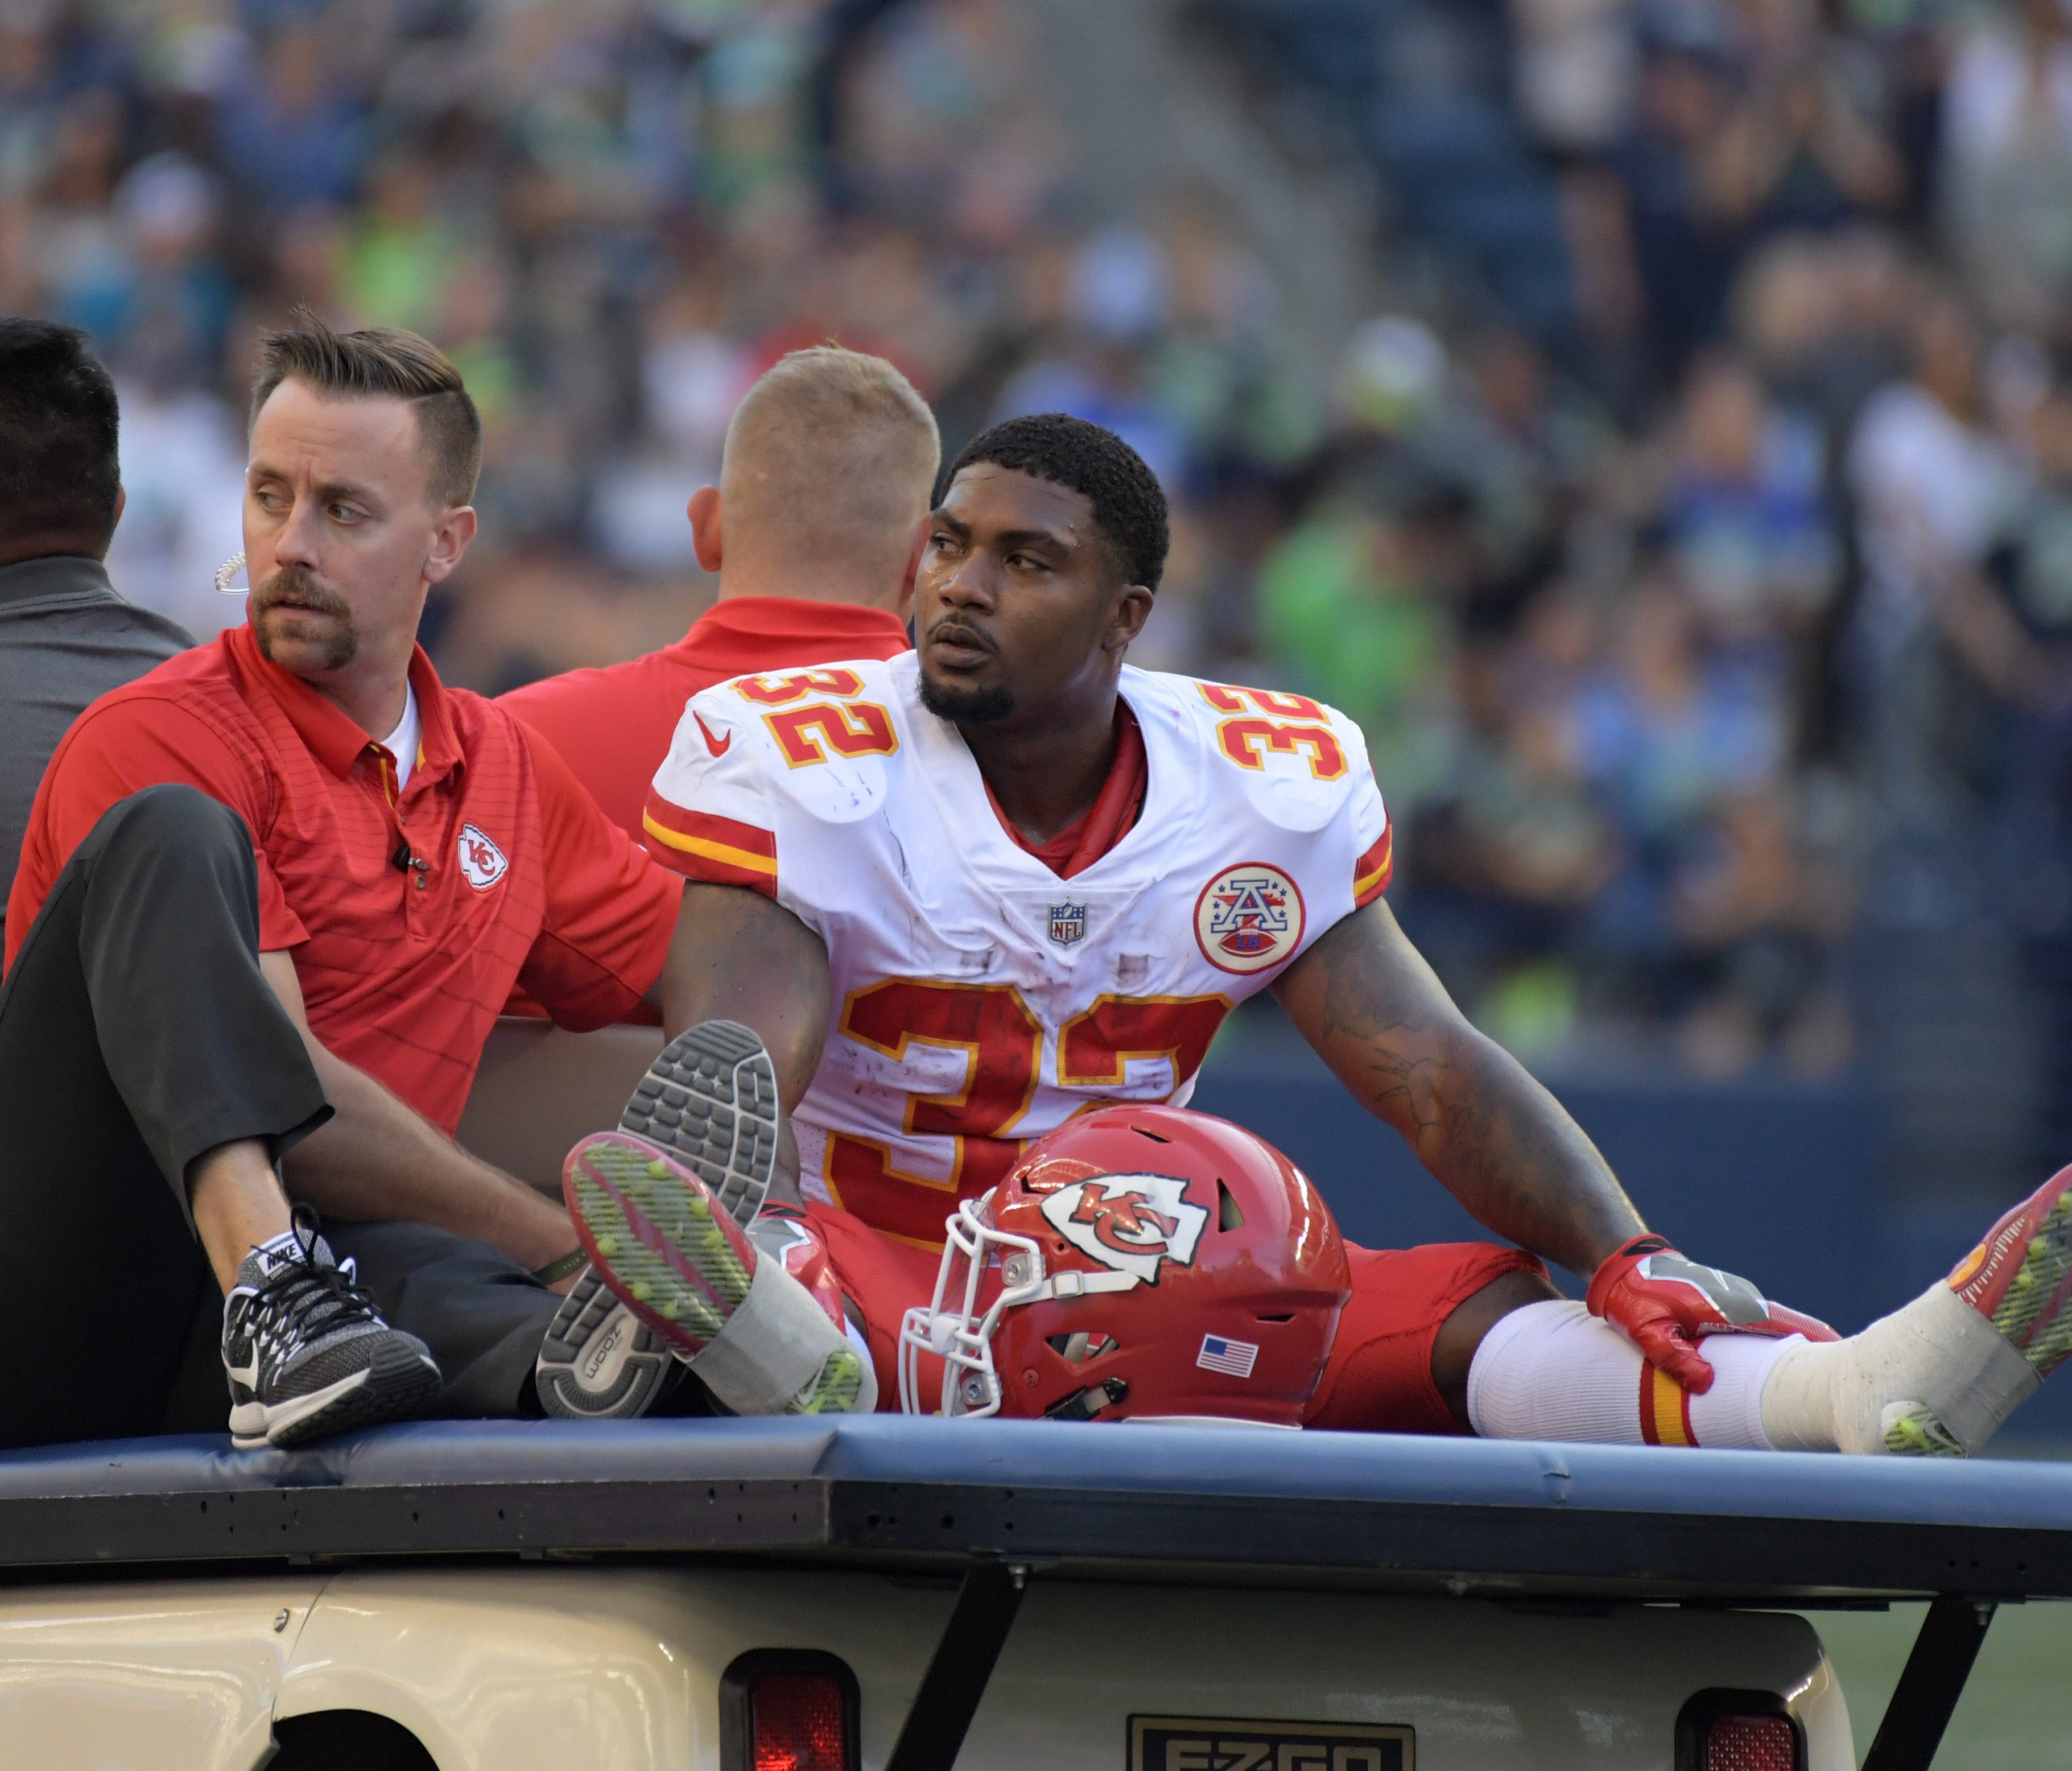 Kansas City Chiefs running back Spencer Ware (32) is taken off the field with an injury during a NFL football game against the Seattle Seahawks at CenturyLink Field.